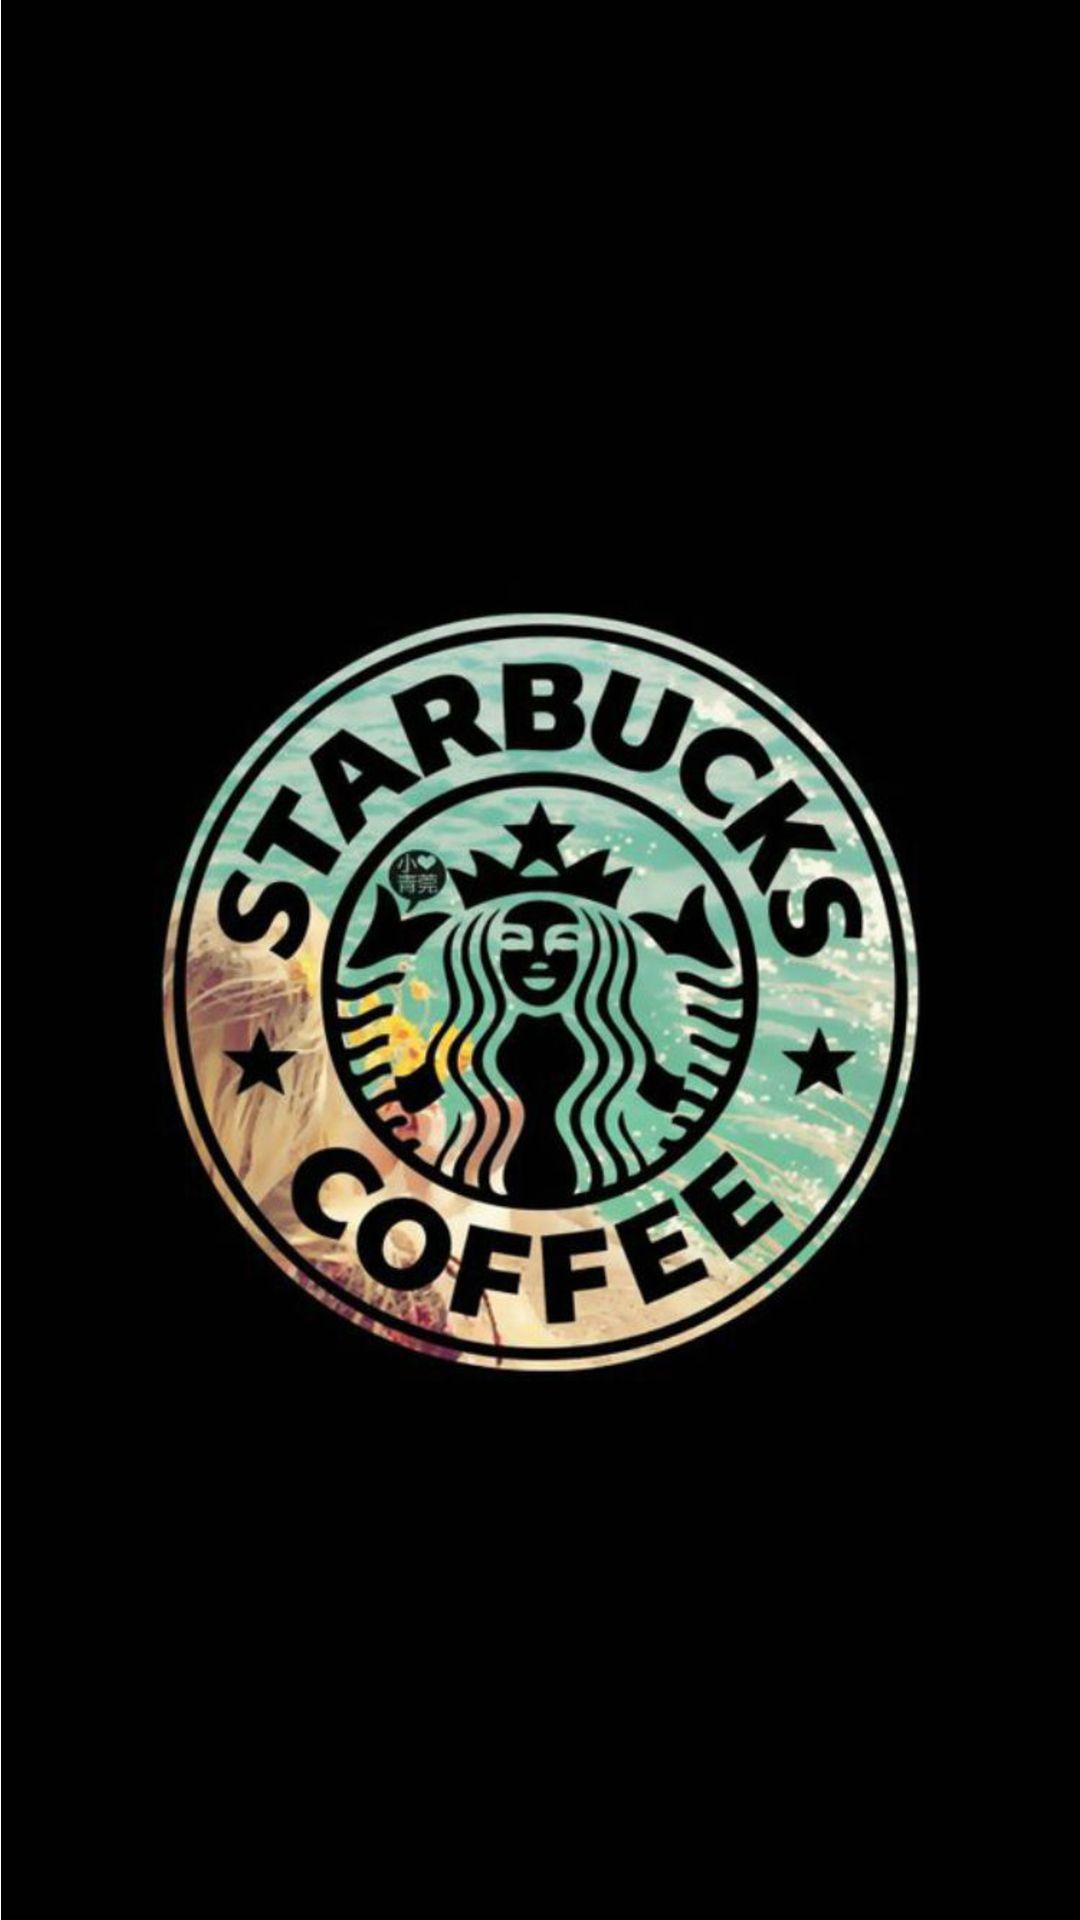 Featured image of post Starbucks Coffee Wallpaper Hd Coffee wallpaper iphone starbucks wallpaper wallpaper for your phone locked wallpaper trendy wallpaper cellphone wallpaper lock screen wallpaper cute wallpapers winter wallpapers